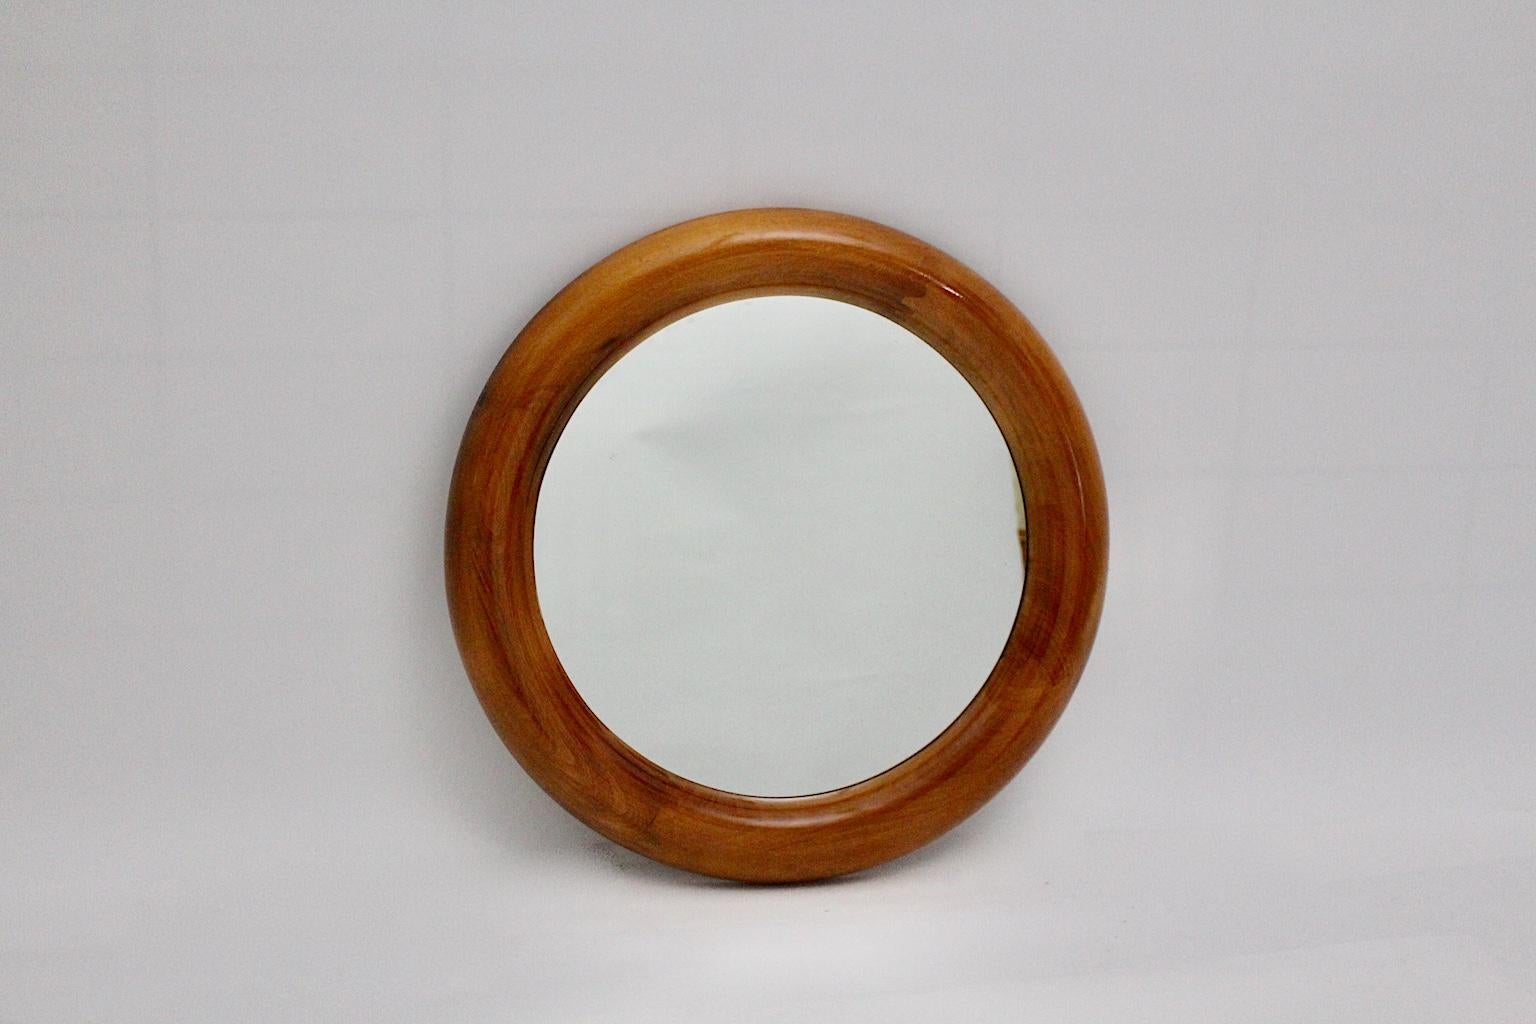 Modern vintage round shaped vintage wall mirror from natural lacquered beech and mirror glass.
The wall mirror features a beautiful warm vivid color tone which is very similar to cherrywood and demostrates stunning warmth and depth.
Through its